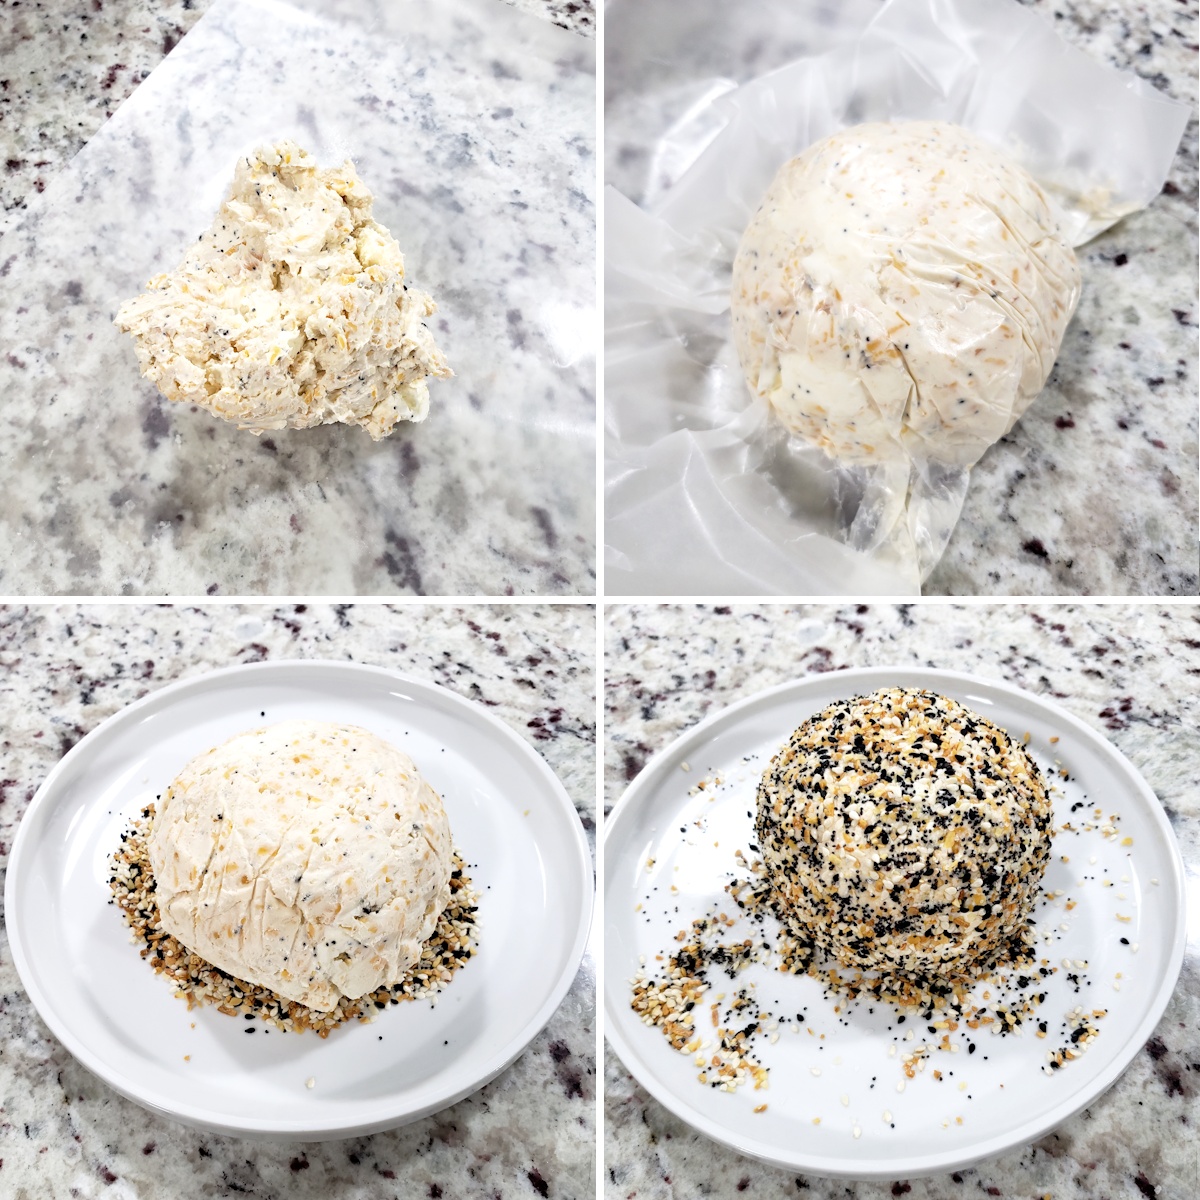 Forming a cheese ball and covering in seasoning.